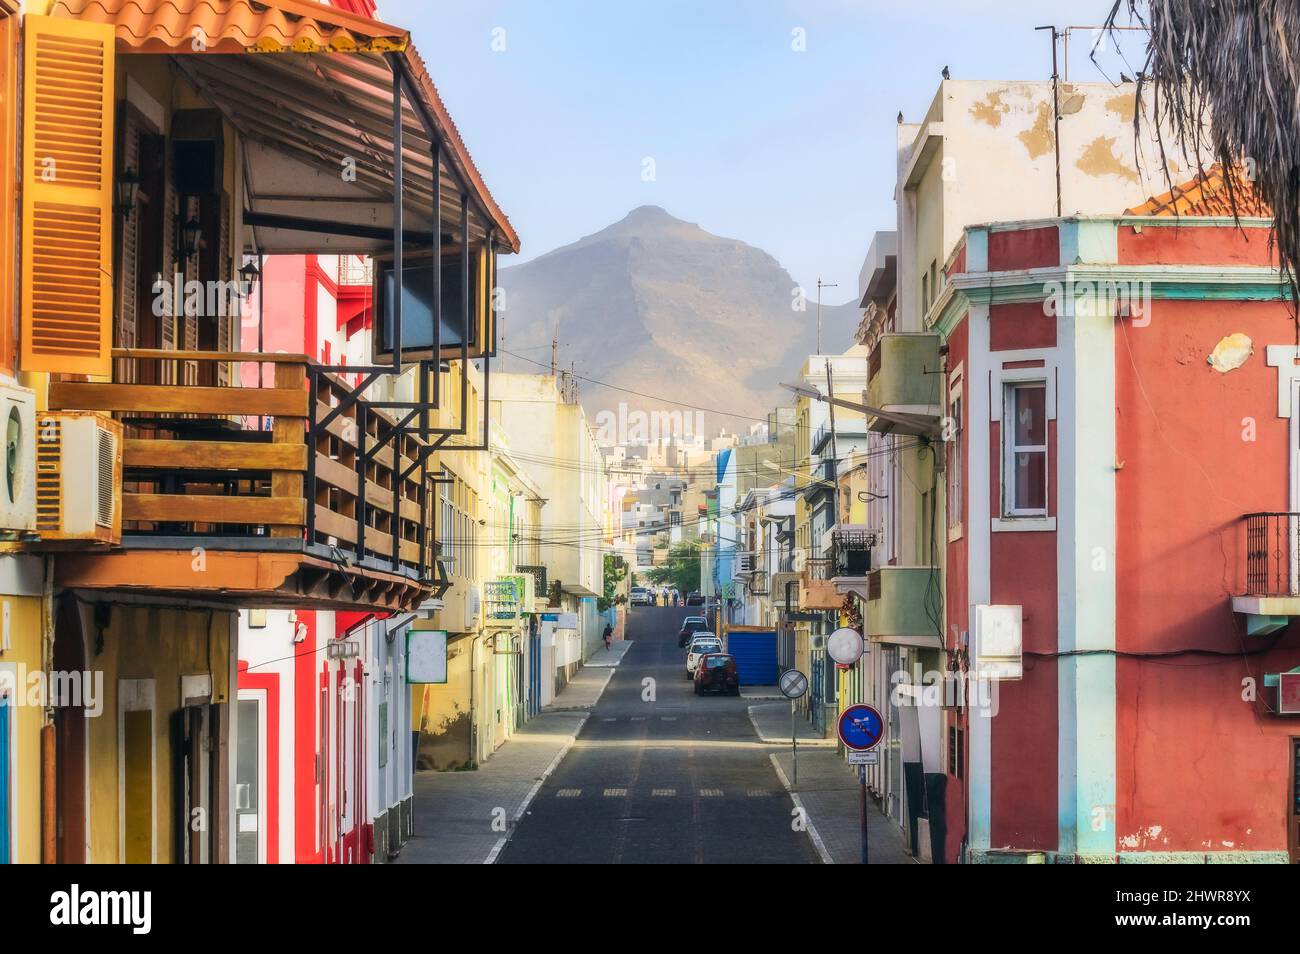 Cape Verde, Sao Vicente, Mindelo, Empty city street with house balcony in foreground and mountain in background Stock Photo